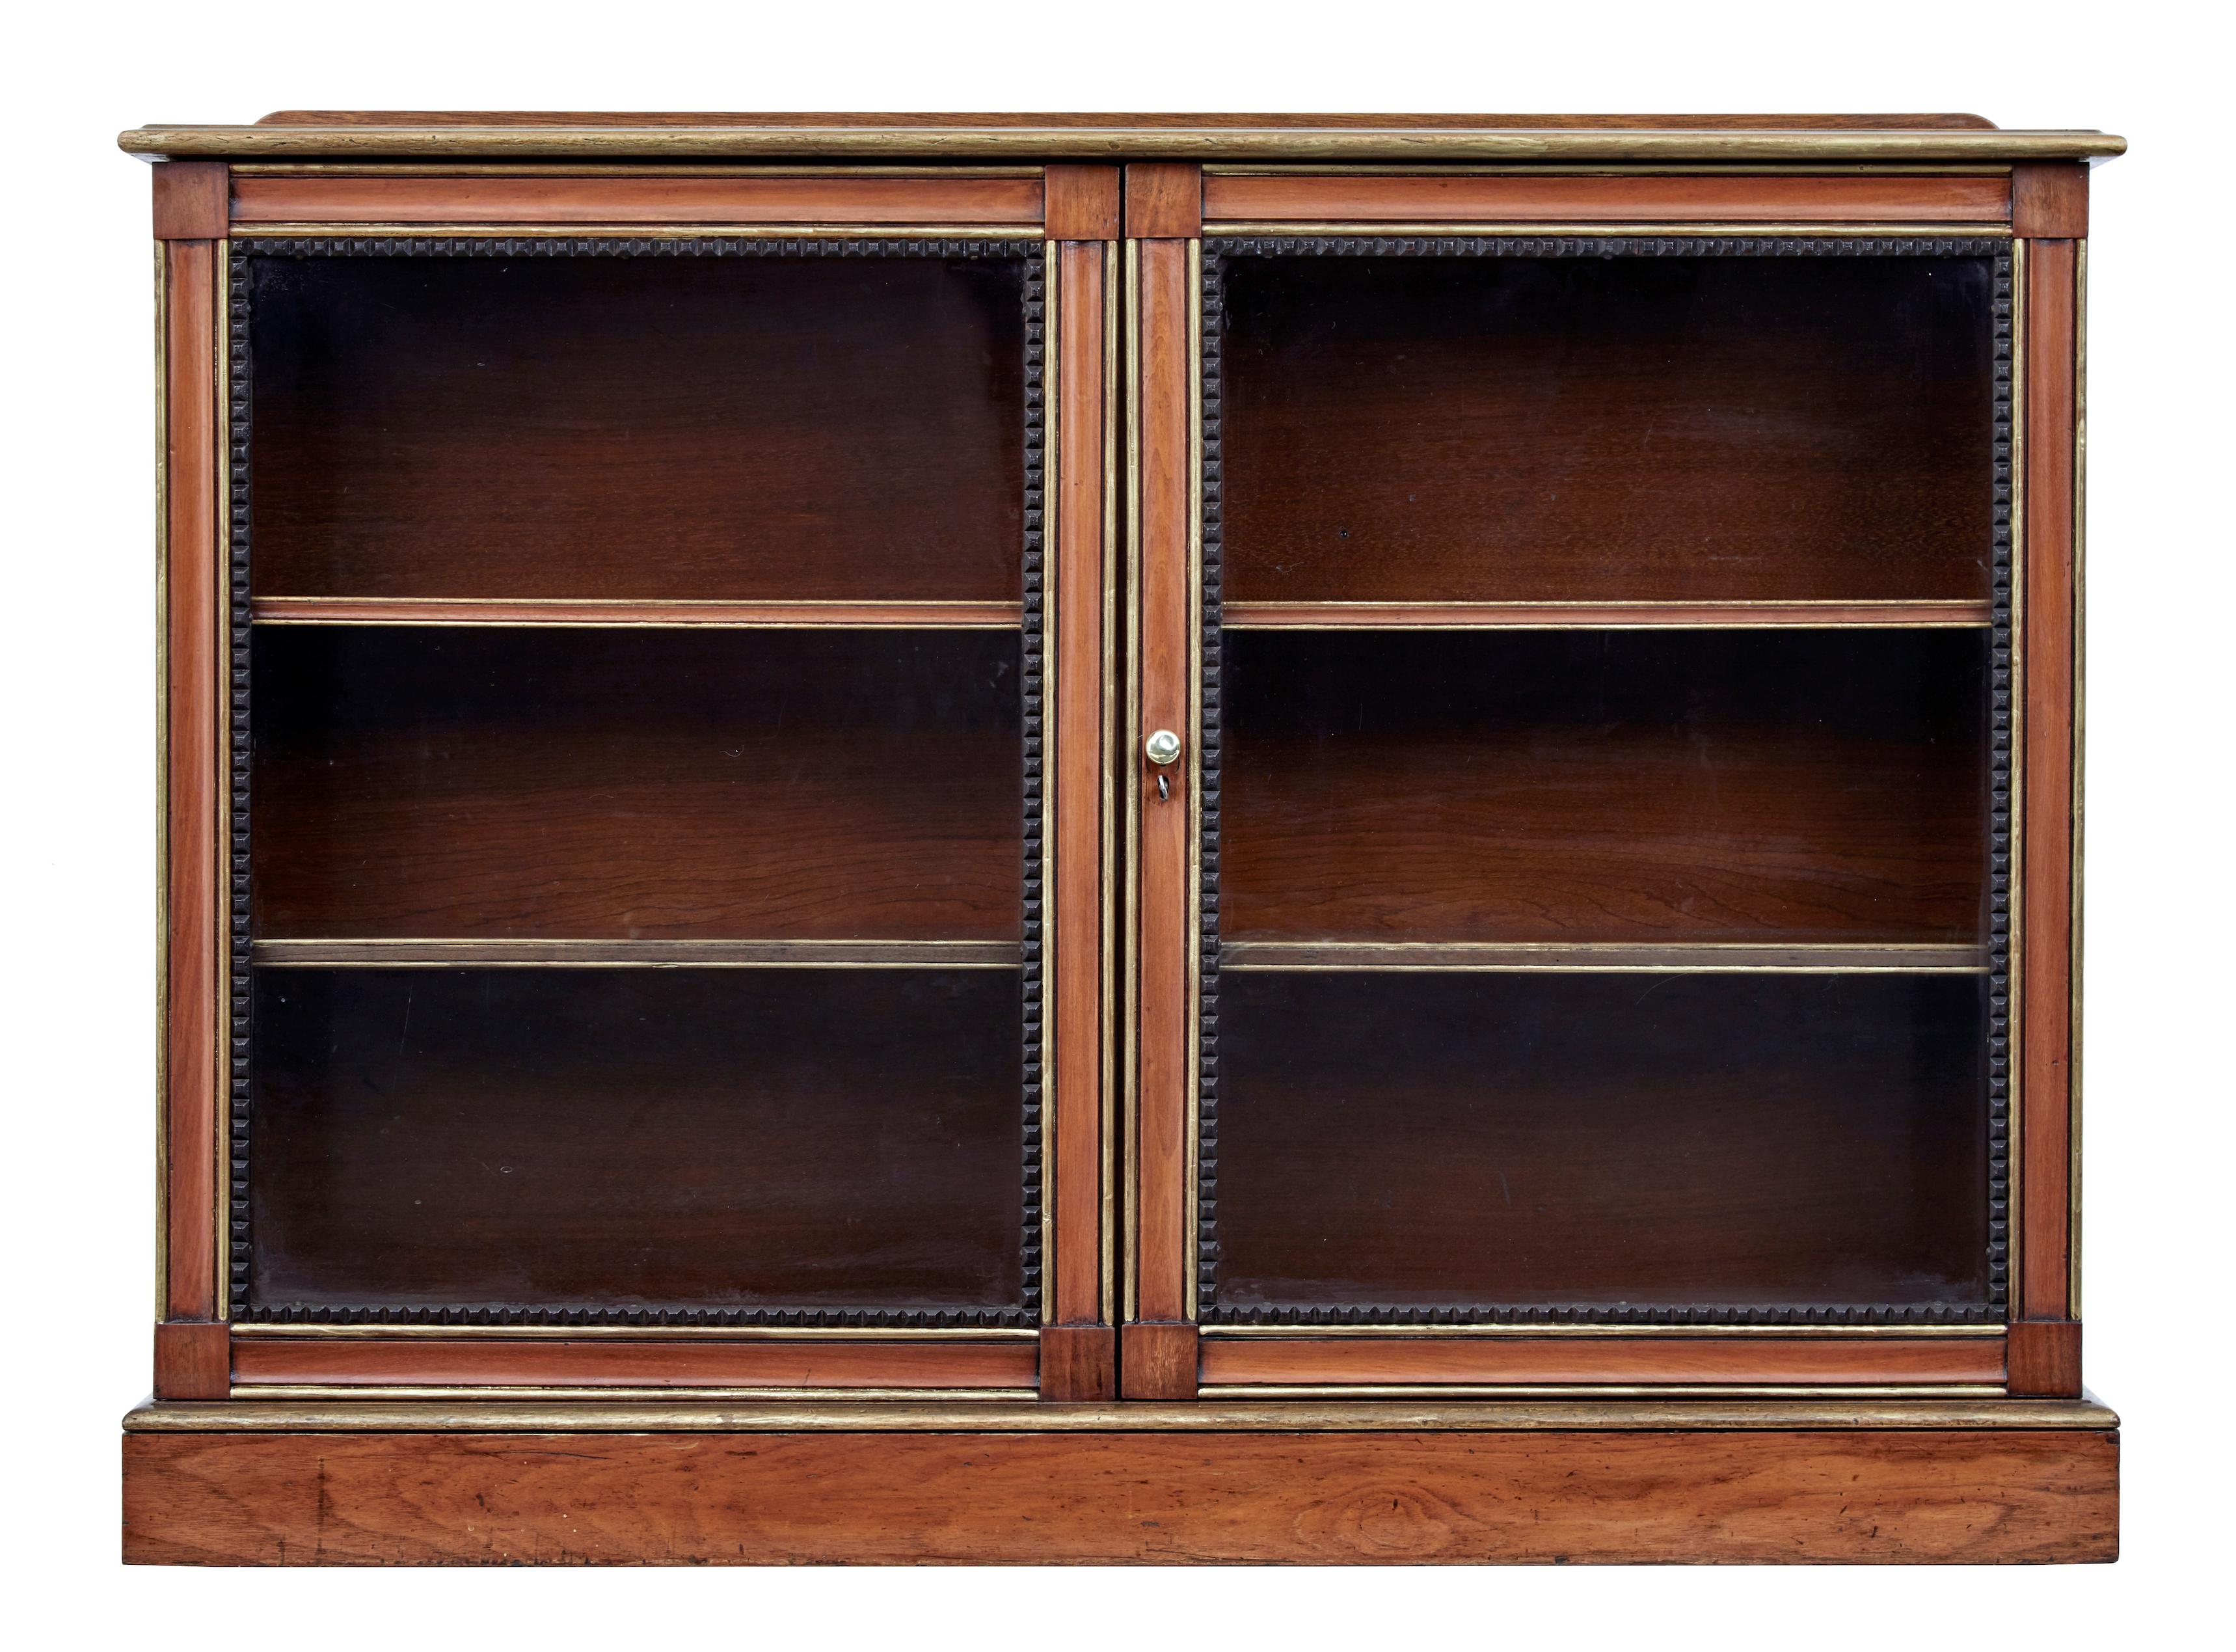 19th century aesthetic movement walnut and mahogany bookcase, circa 1880.

Good quality walnut glazed door bookcase. Walnut top surface with short gallery, gilt edging to top/bottom and doors. Doors further decorated with ebonised dentil